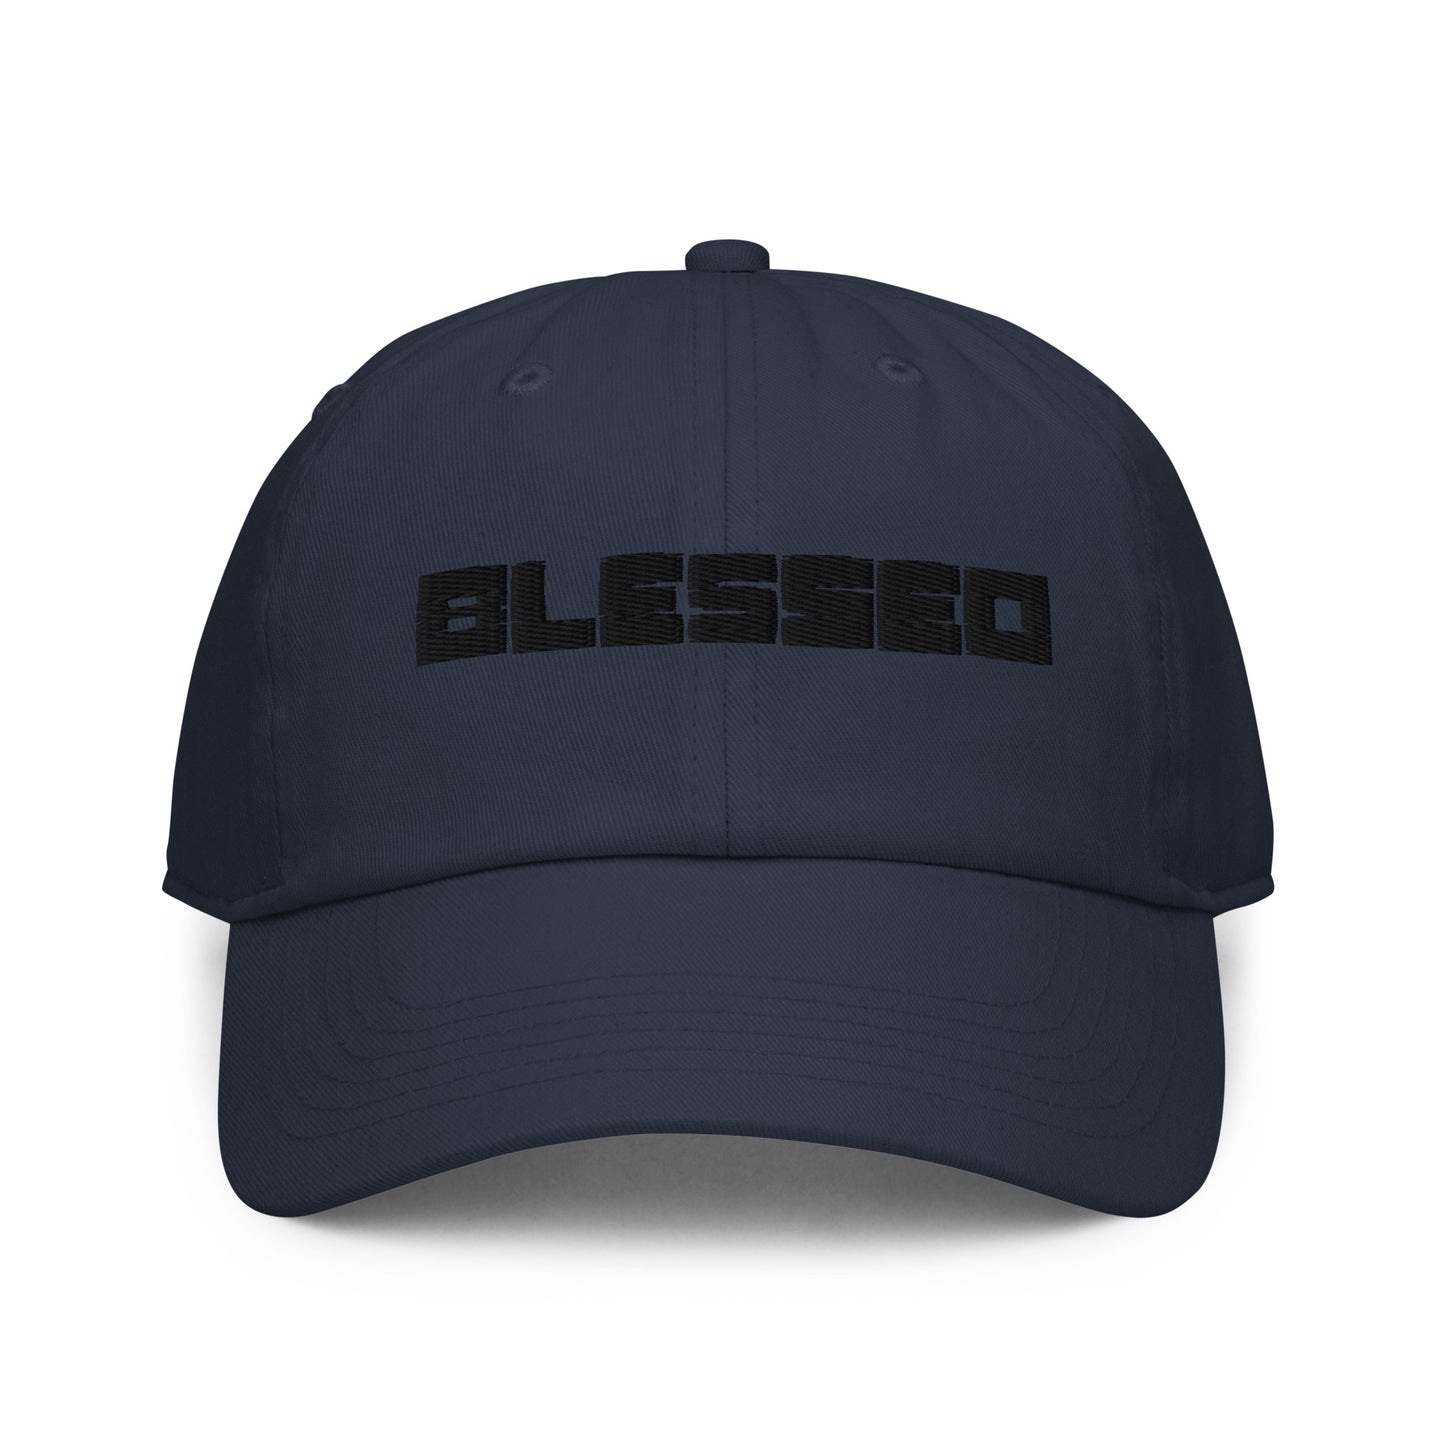 Blessed Fitted baseball cap